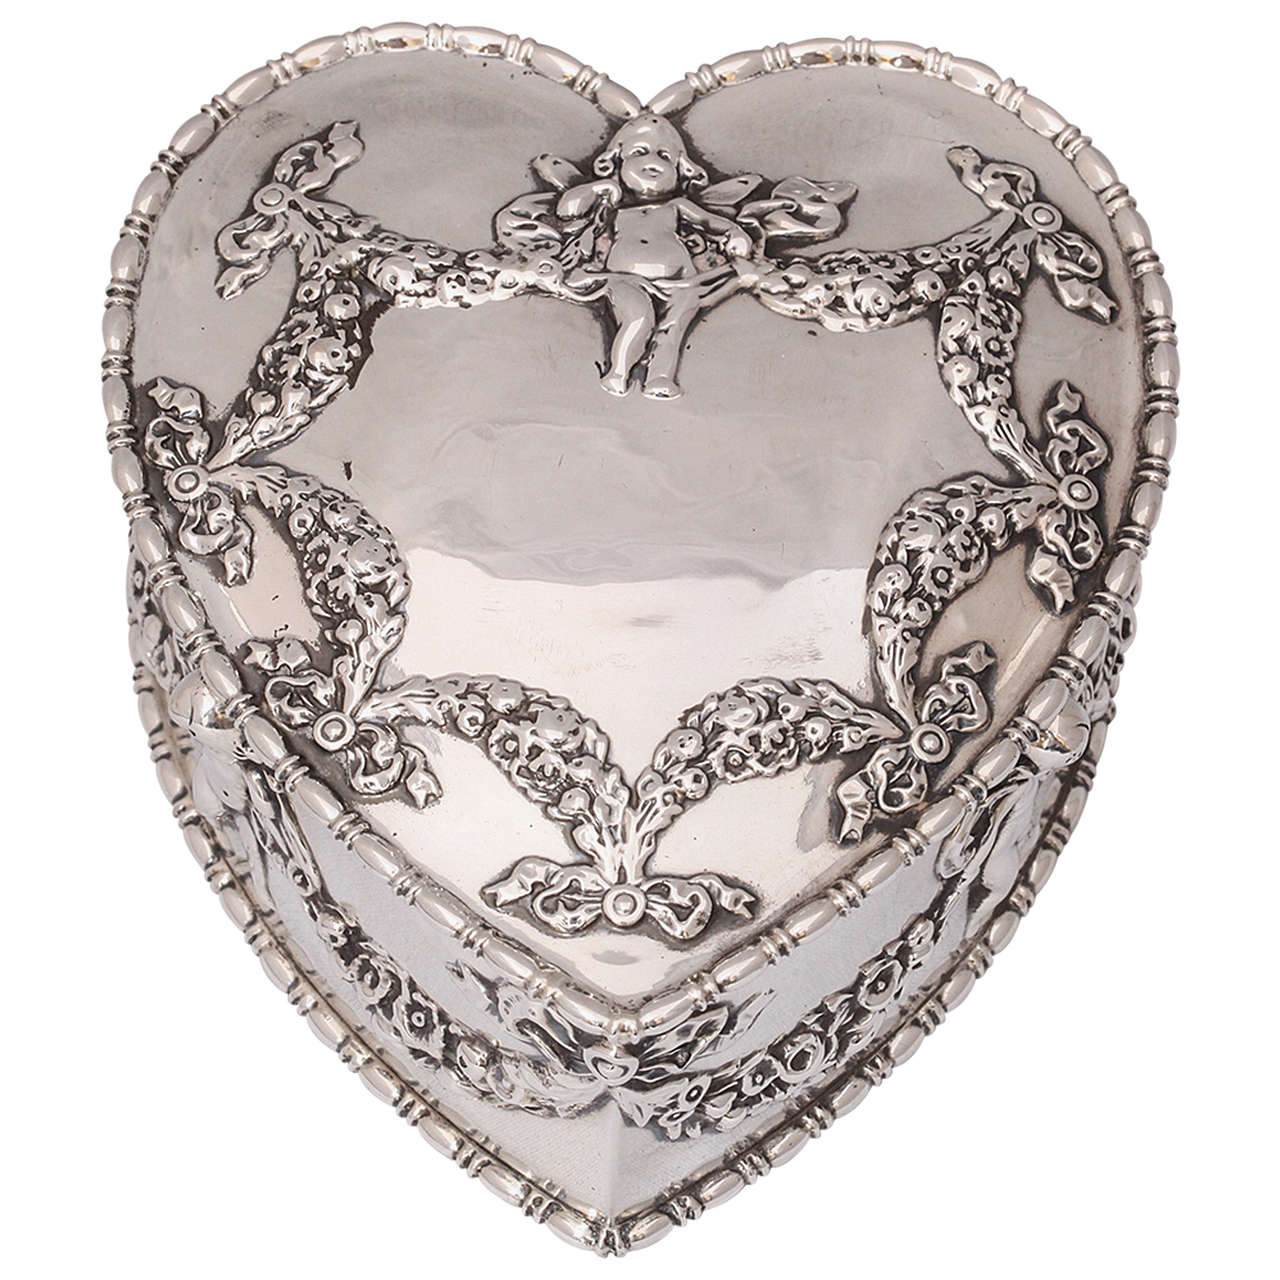 Large Victorian Sterling Silver Heart-Form Jewelry Box with Hinged Lid